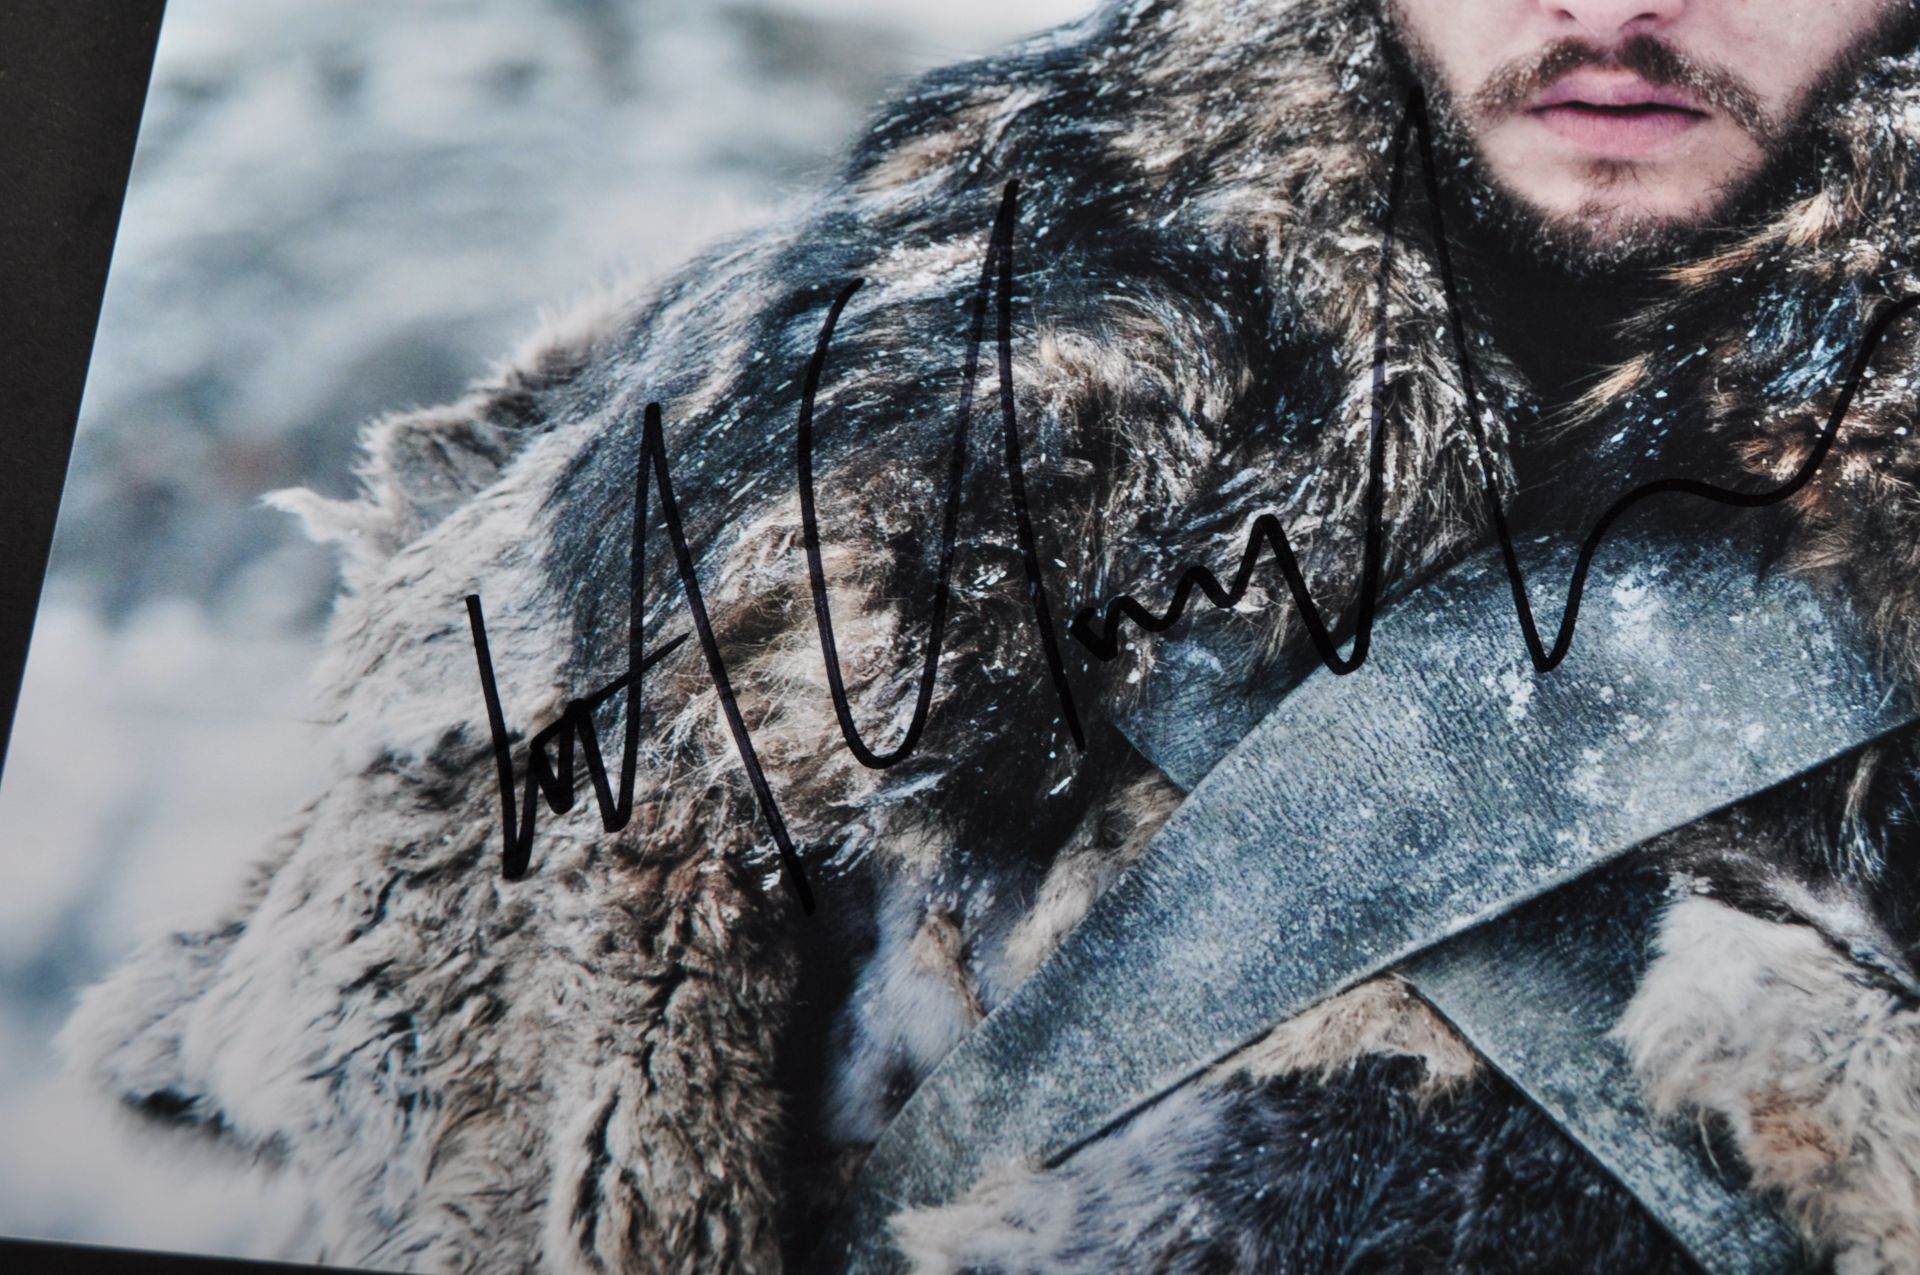 KIT HARINGTON - GAME OF THRONES - SIGNED 8X10" PHOTO - AFTAL - Image 2 of 2